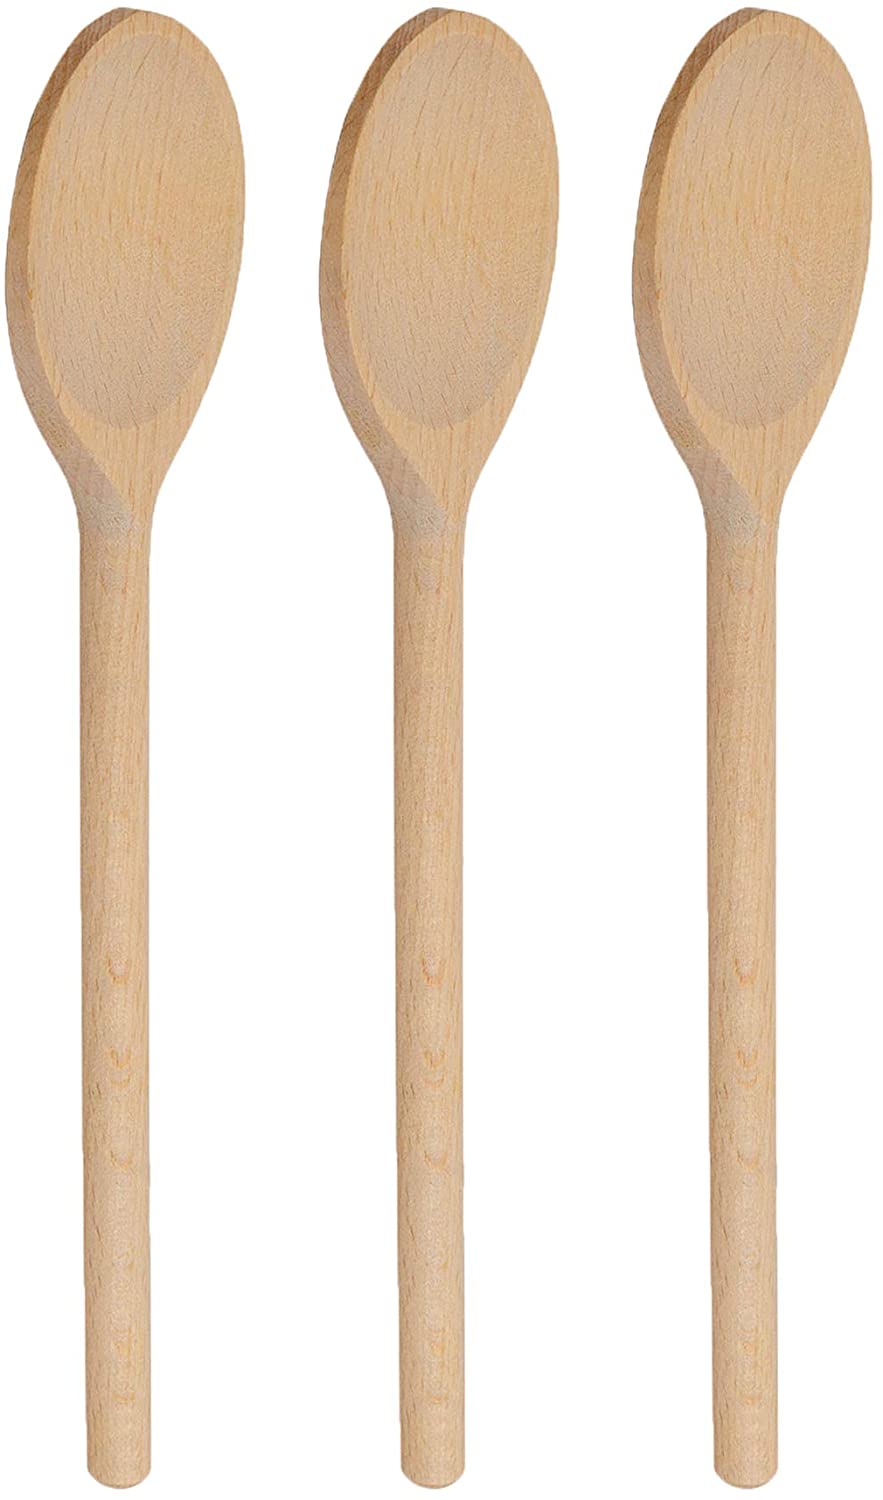 BICB Long Handle Cooking Mini Oval Wooden Spoons